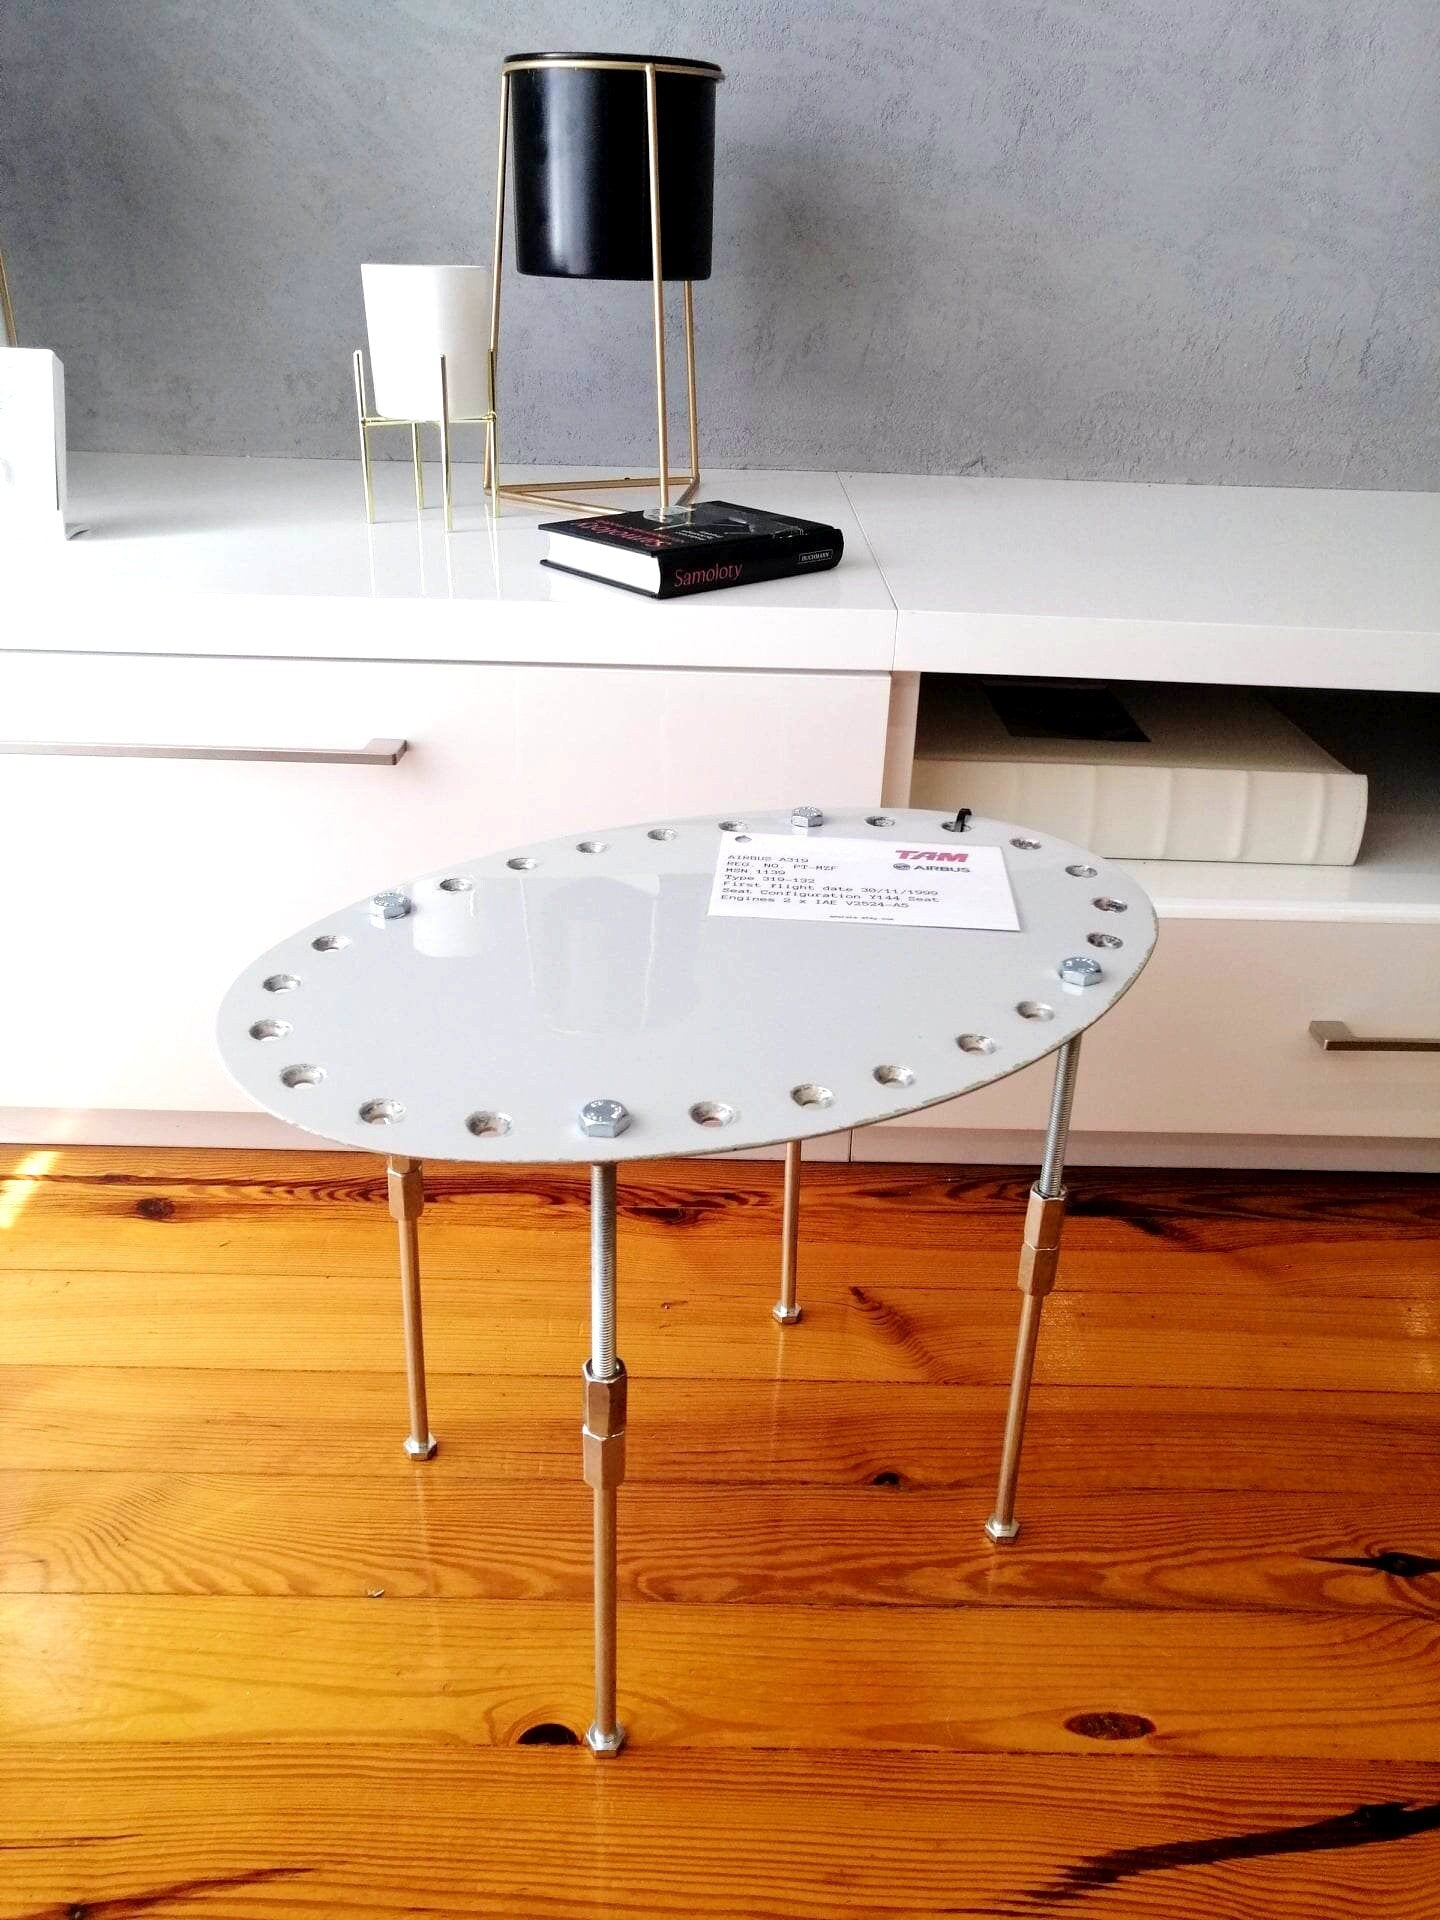 Airbus Side Table, Aircraft Coffee Table Made of Airbus A319 Fuel Tank Door Panel